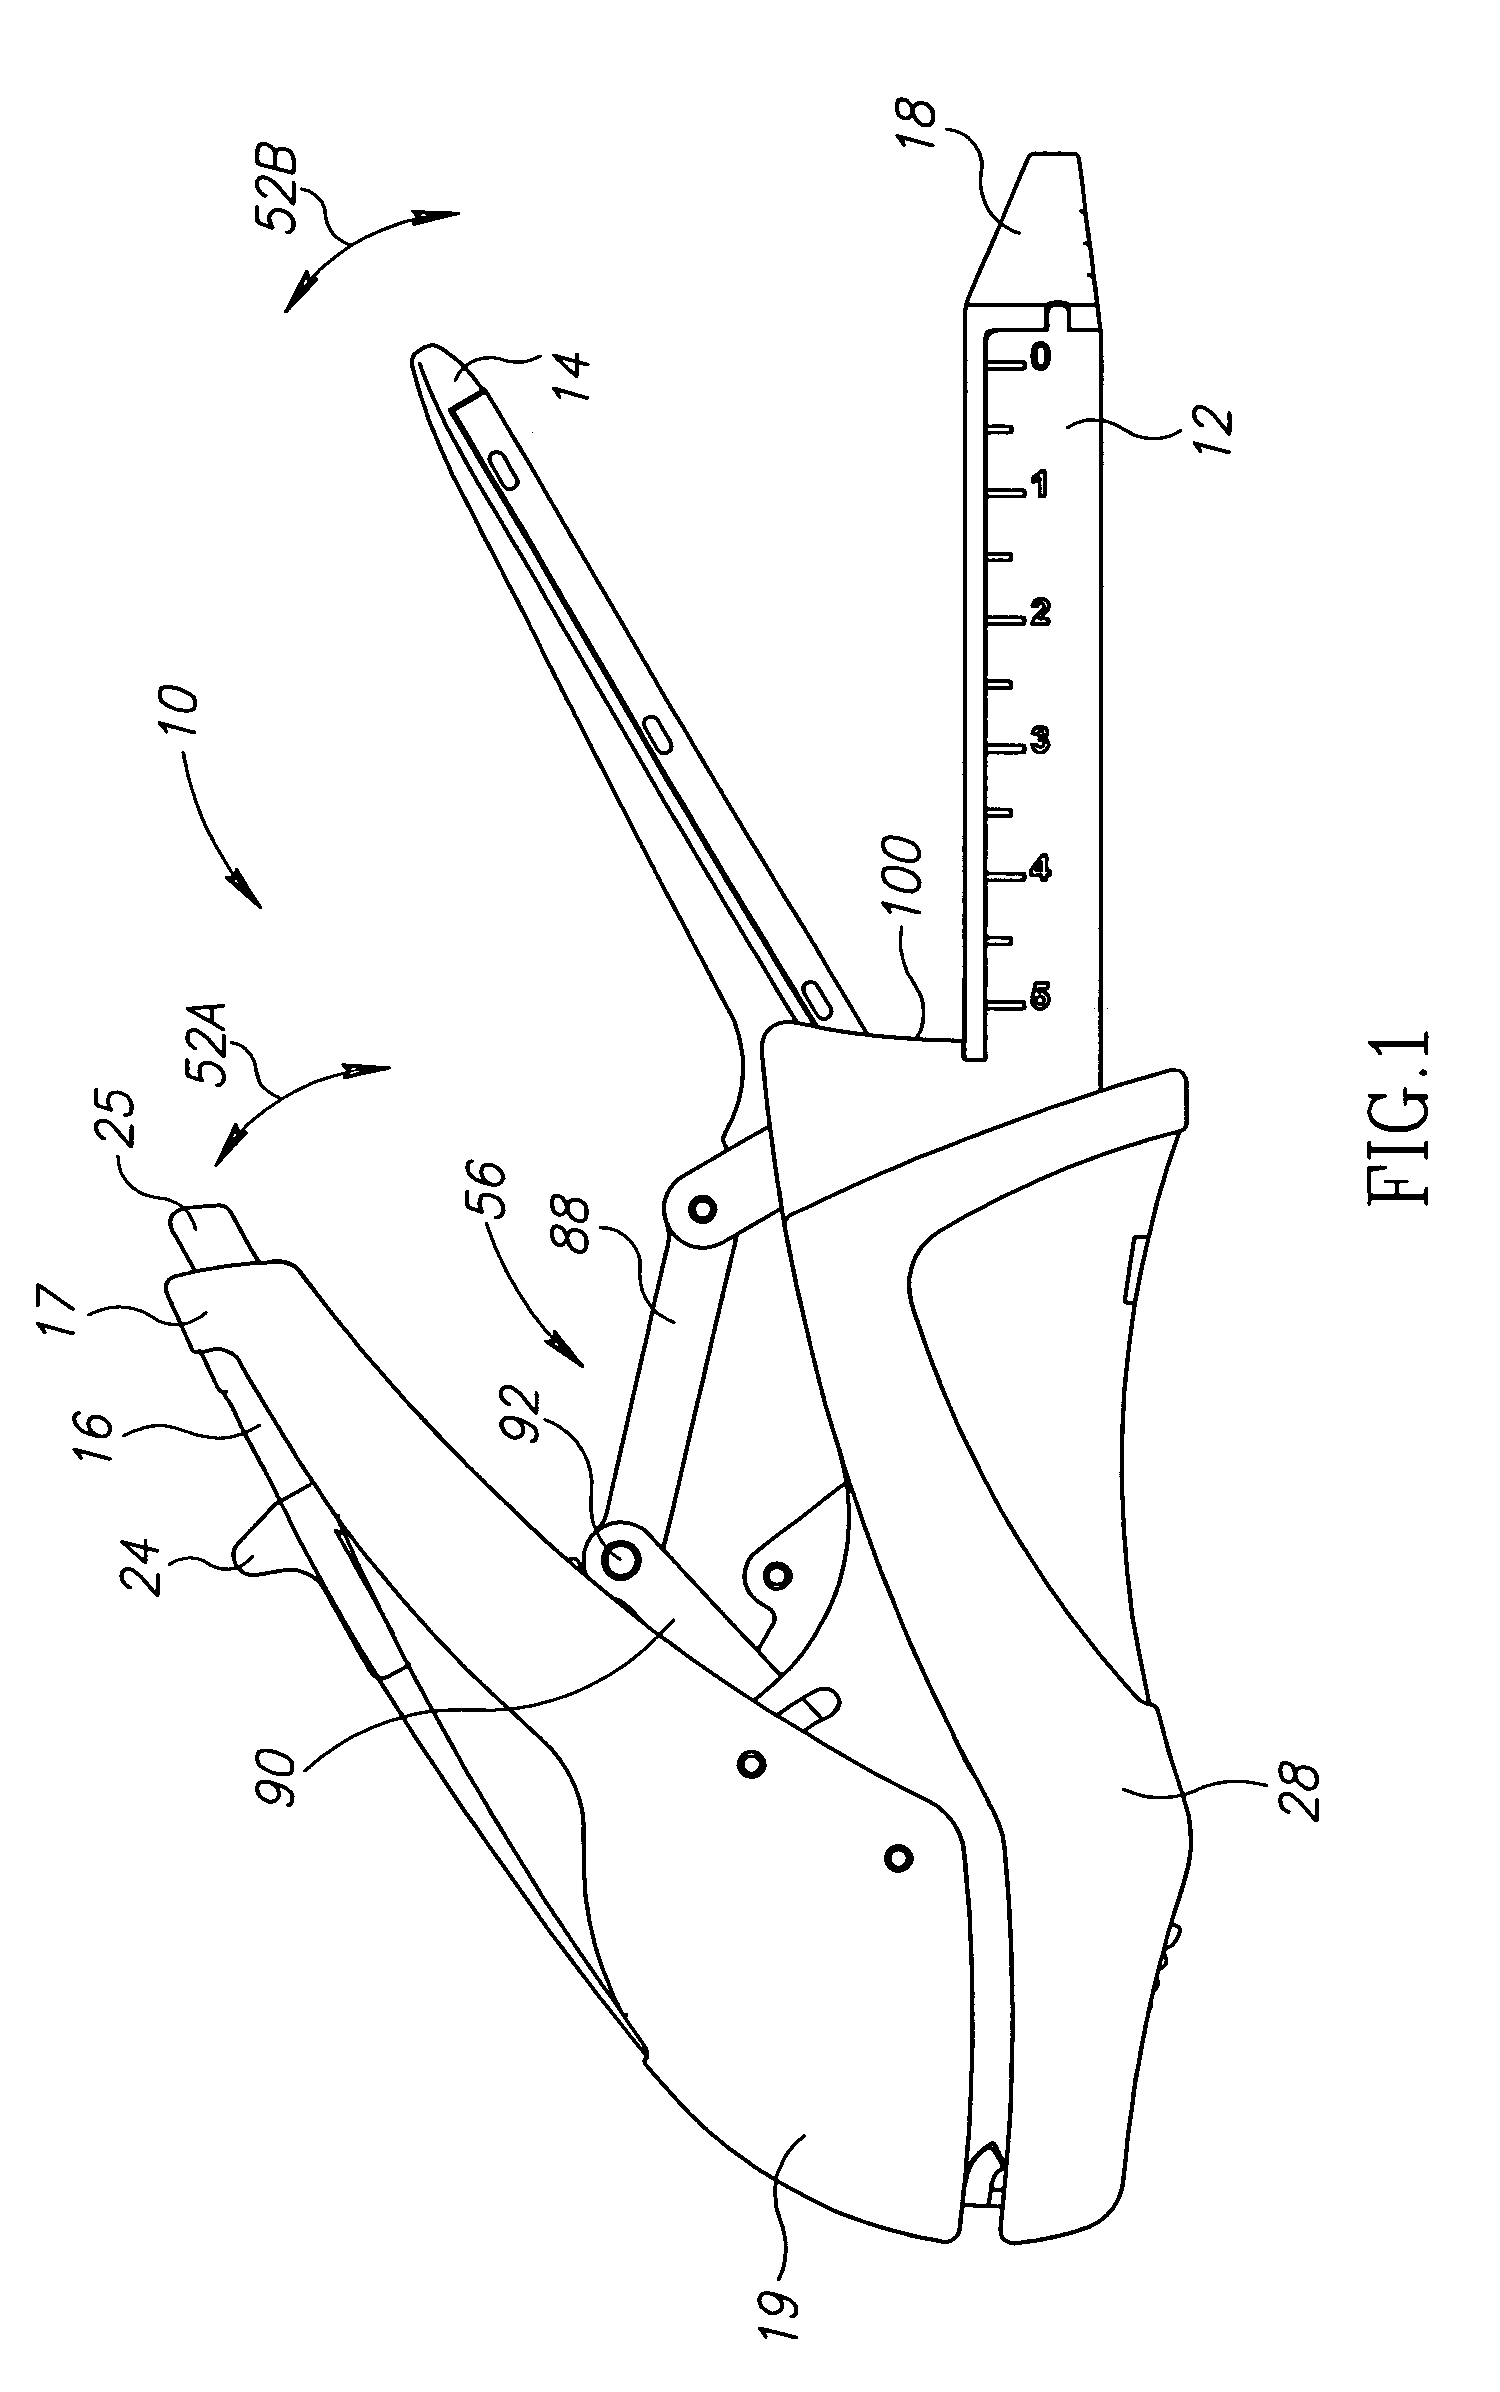 Palm size surgical stapler for single hand operation